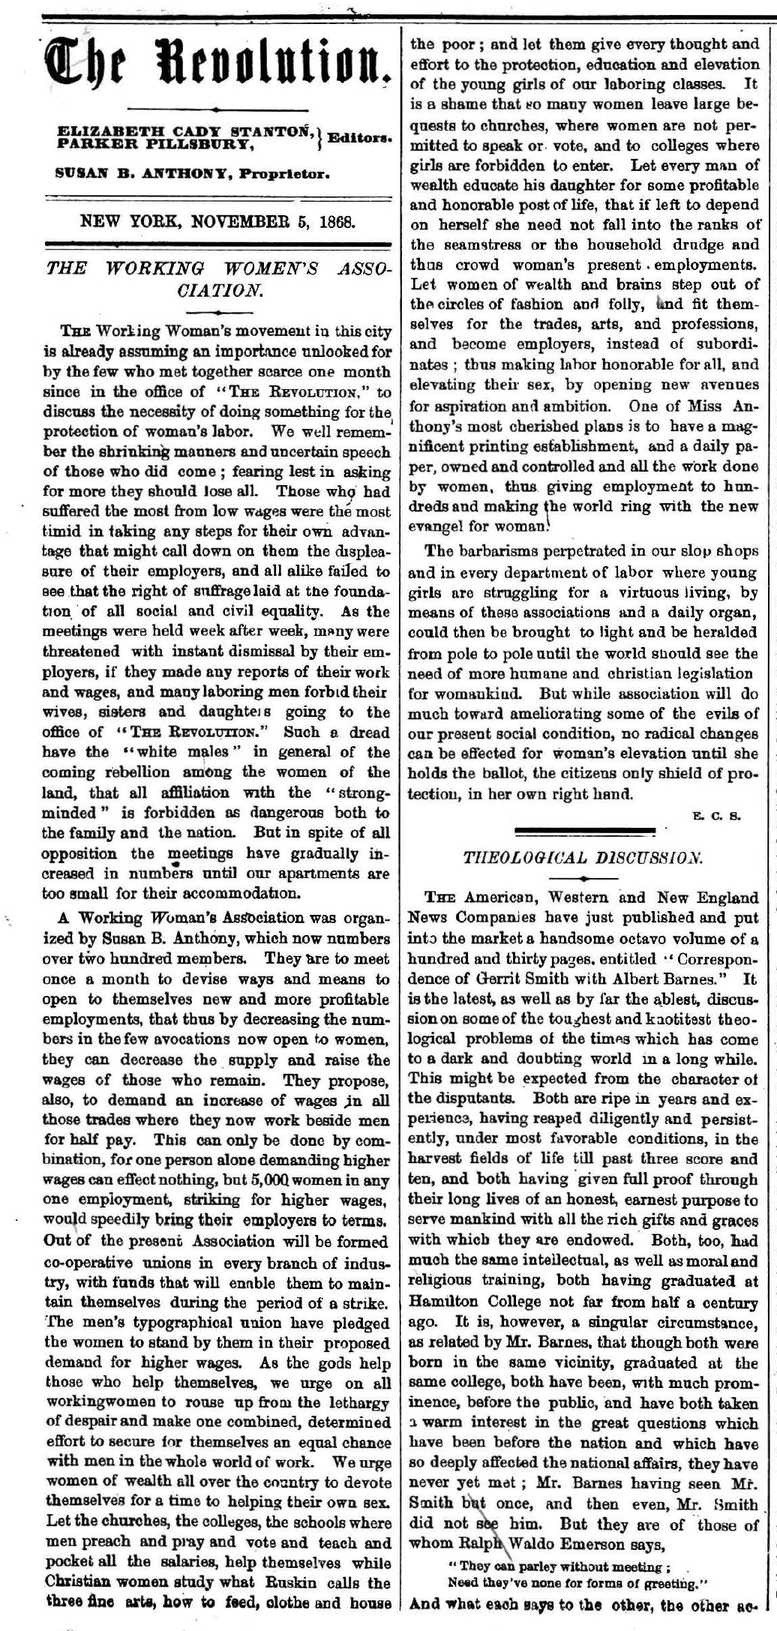 The-Revolution-Susan-B.-Anthony's-Suffrage-Women's-Rights-Newspaper-November-5,-1868